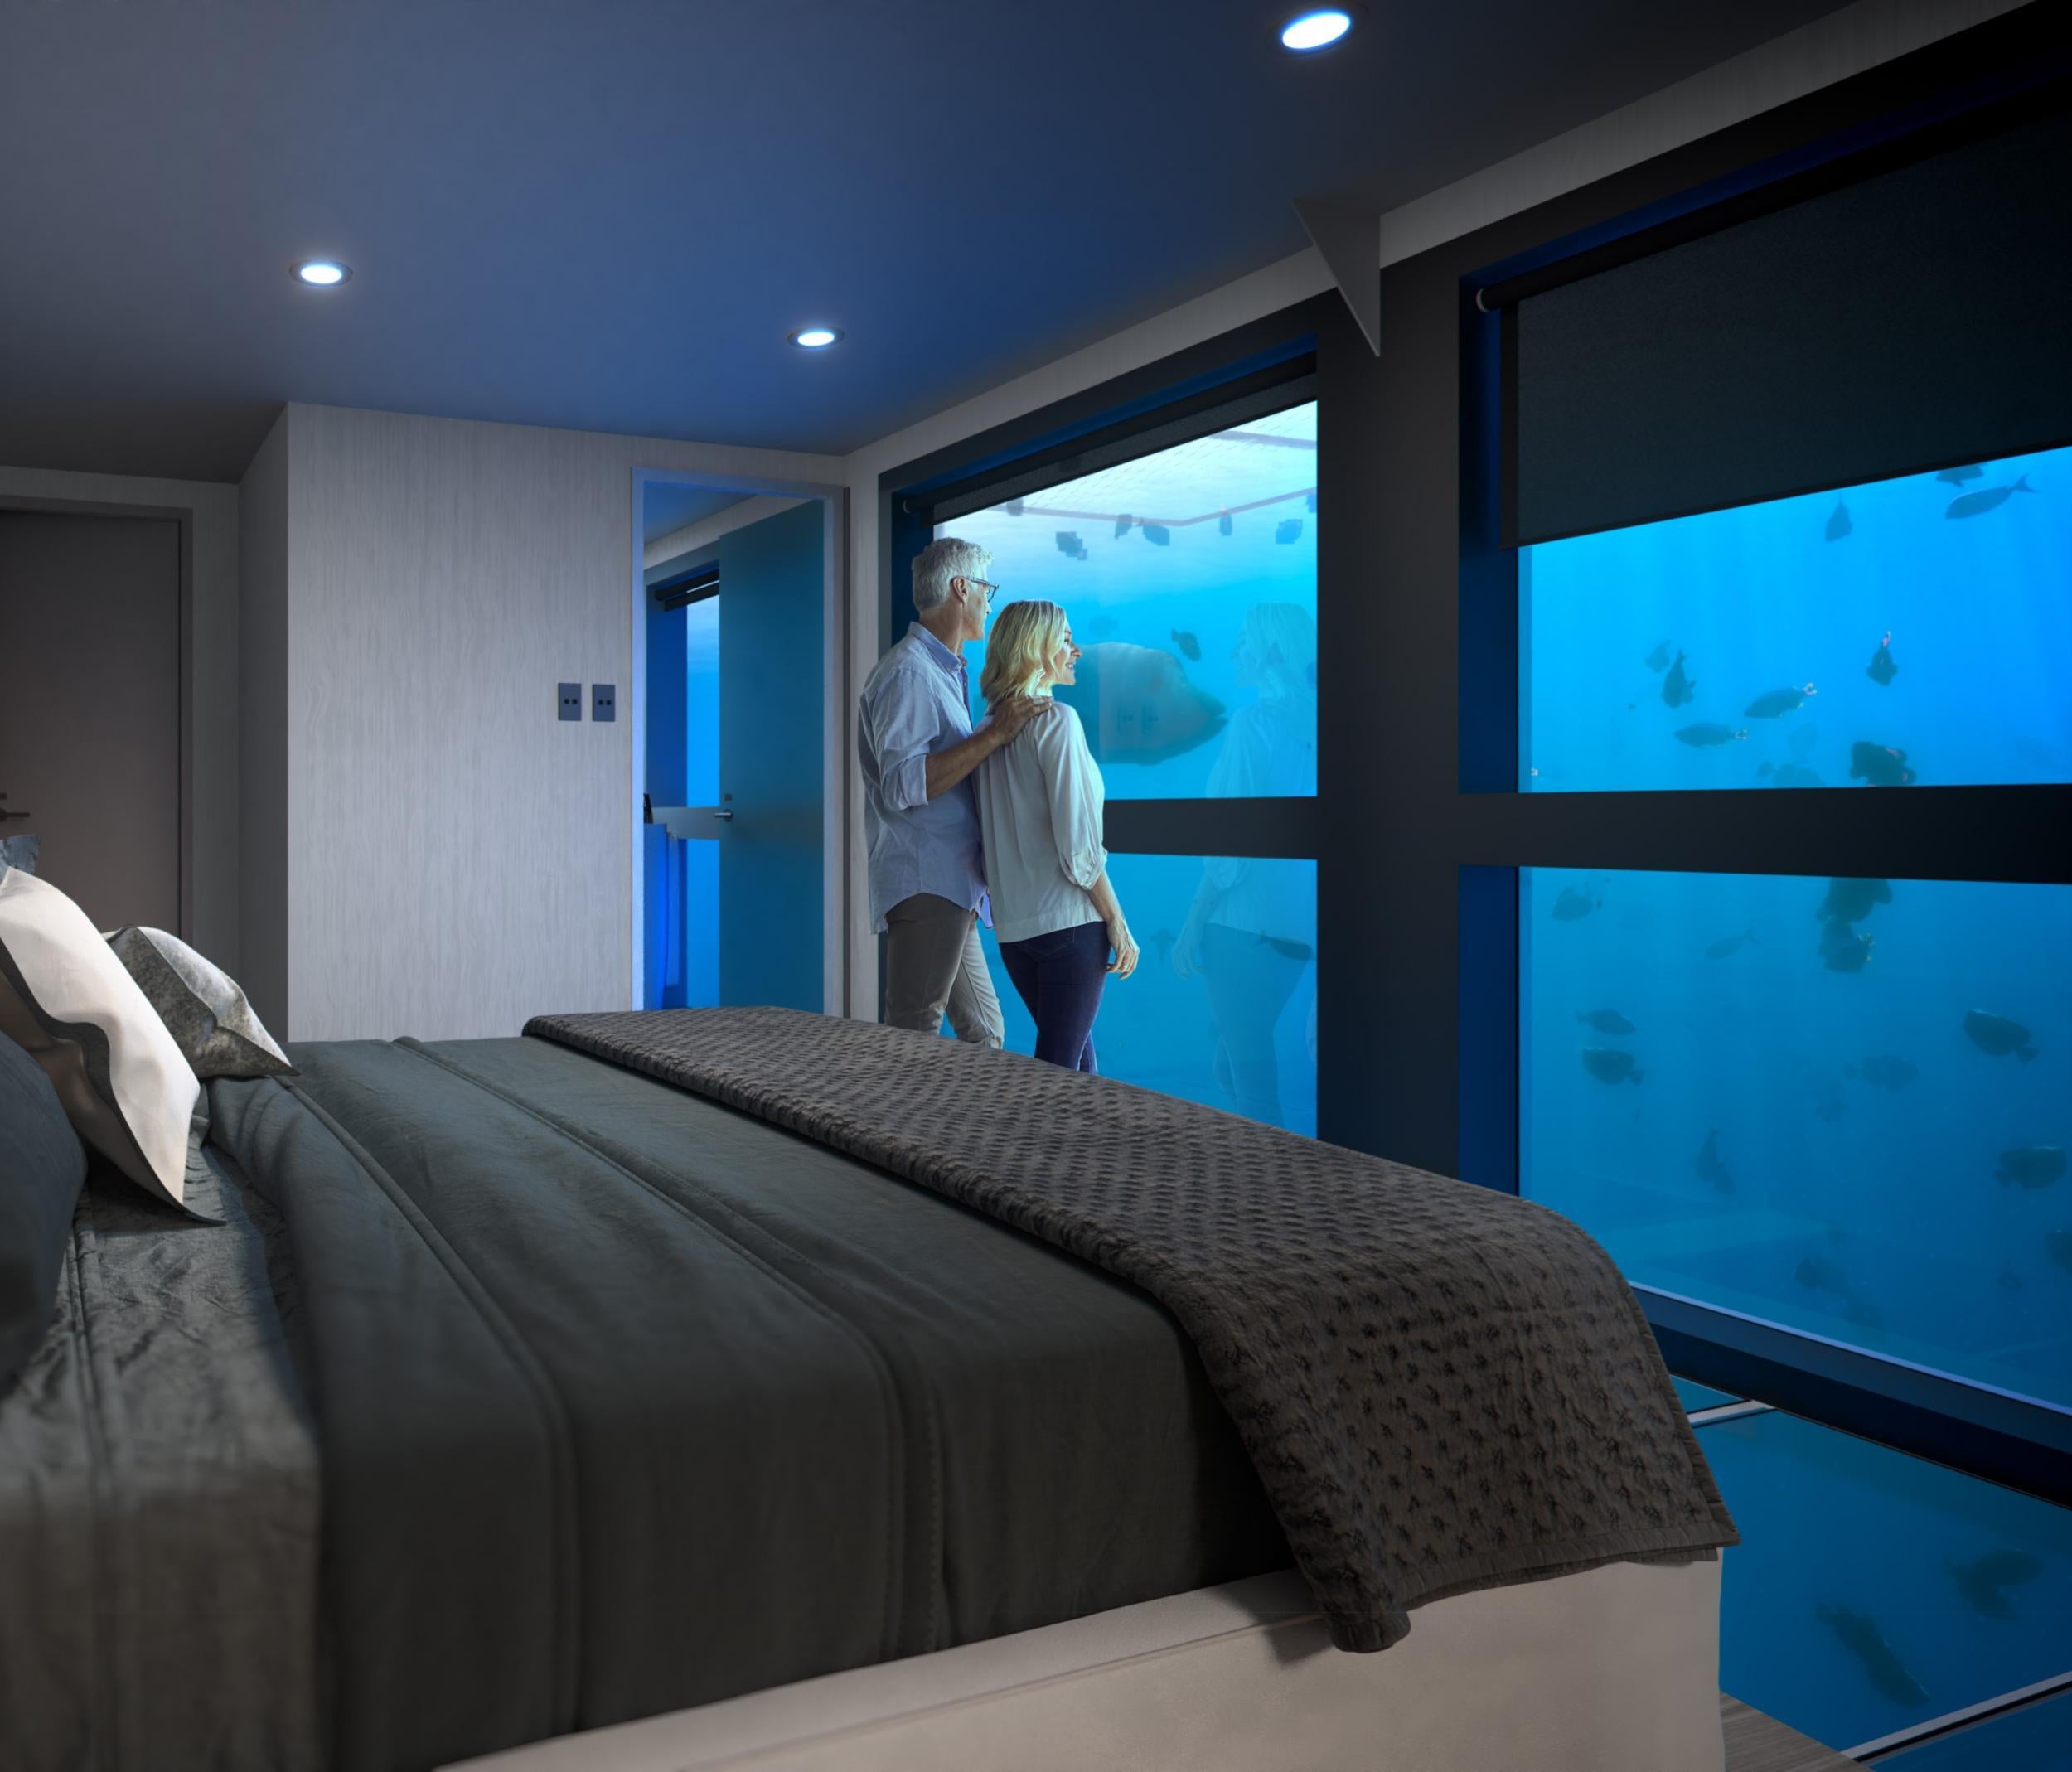 Spot tropical fish, turtles and manta rays from the floor-to-ceiling windows of Australia's new Reefsuites